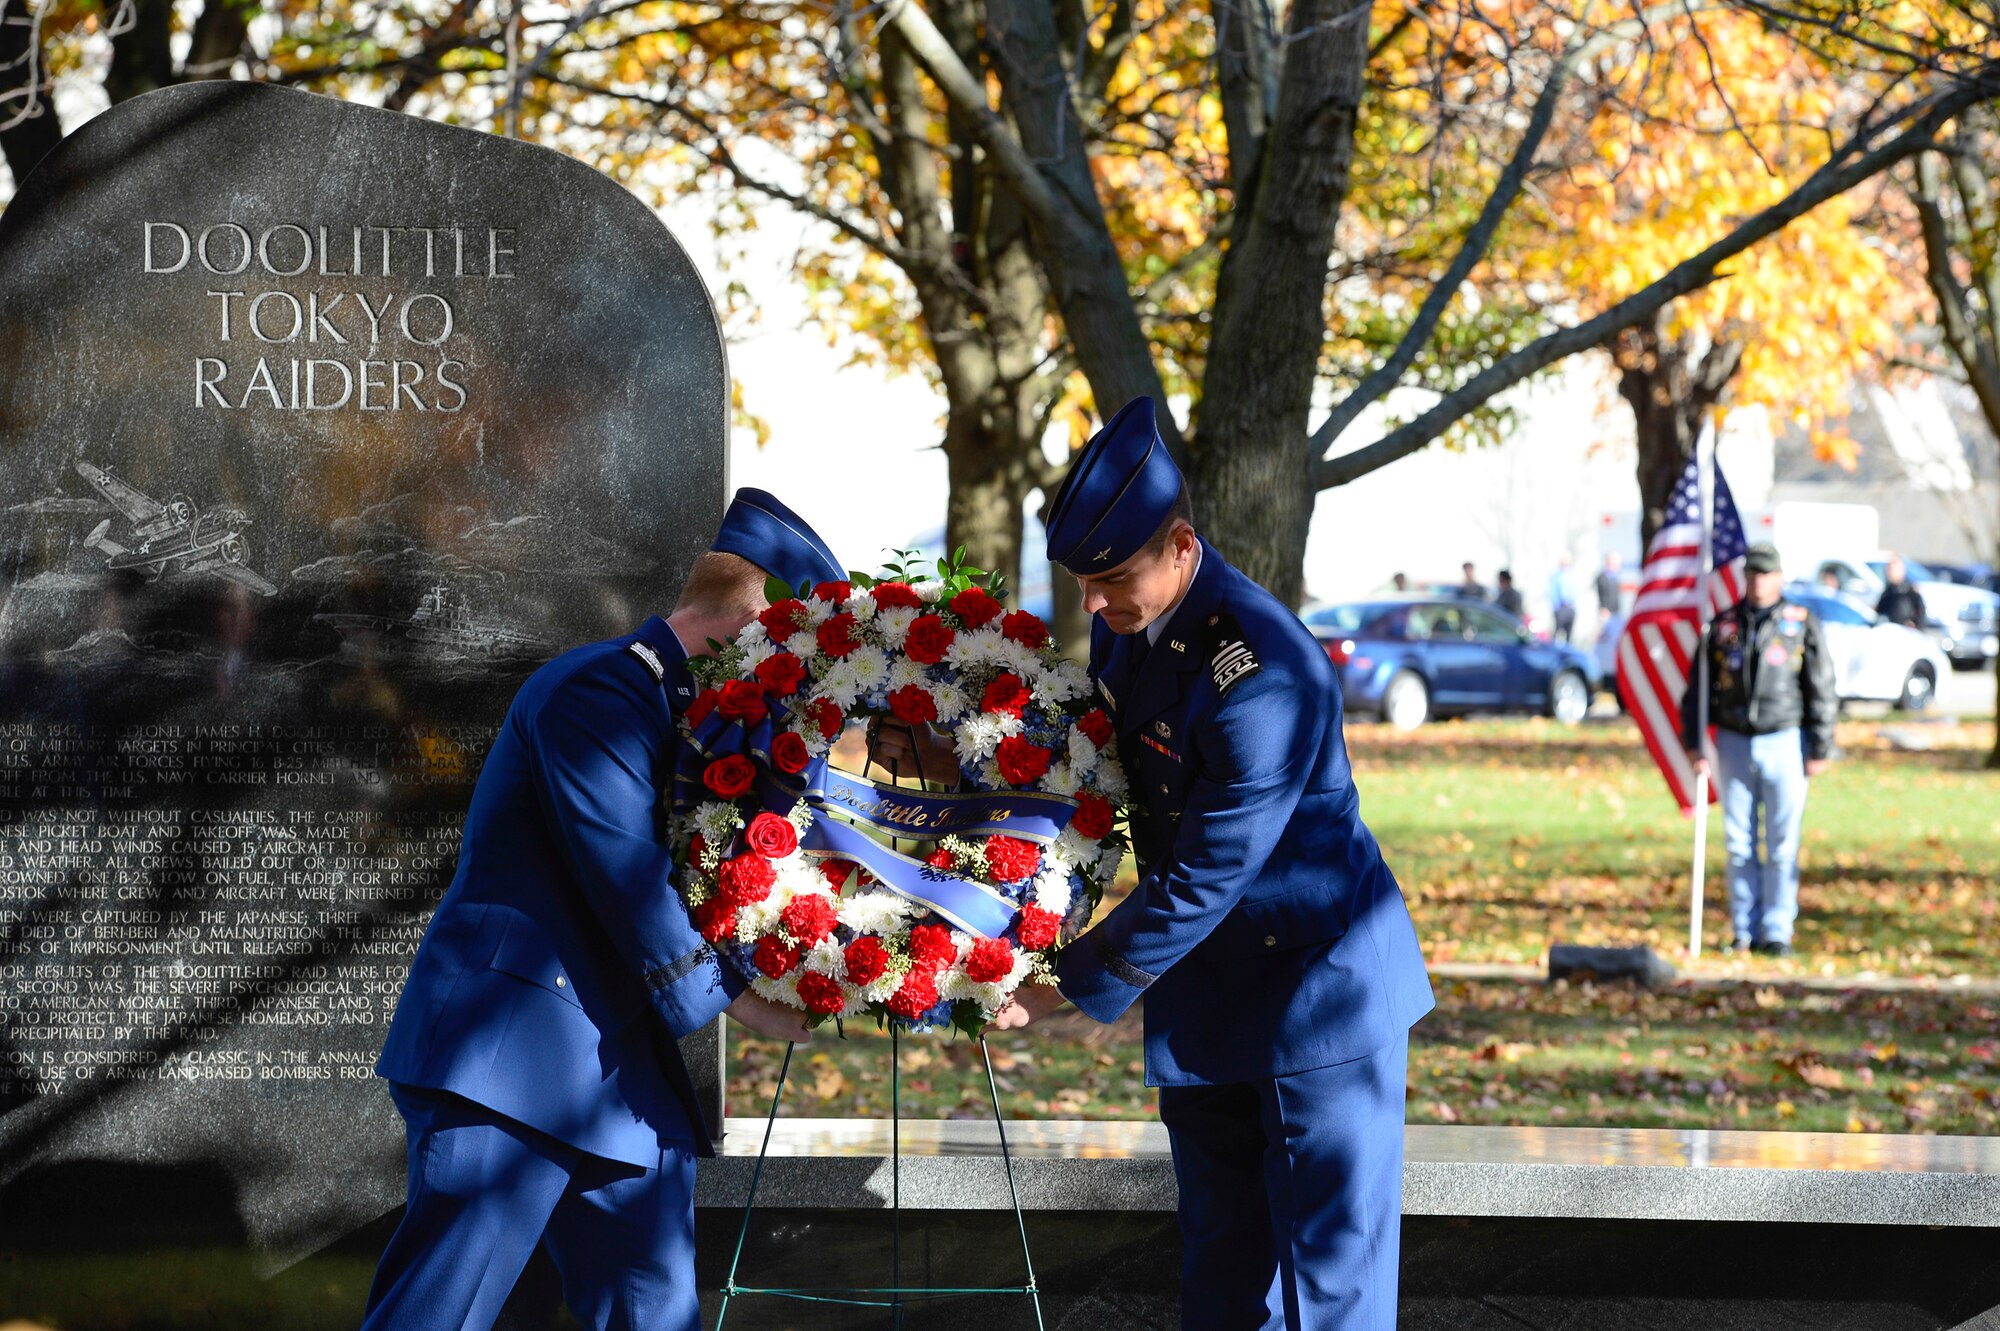 Air Force Academy cadets lay a wreath during the Doolittle Tokyo Raiders memorial at the National Museum of the U.S. Air Force Nov. 09, 2013 in Dayton, Ohio. The remaining Raiders paid tribute to their memorial and commemorated their historic mission and fallen wingmen during their final toast ceremony.